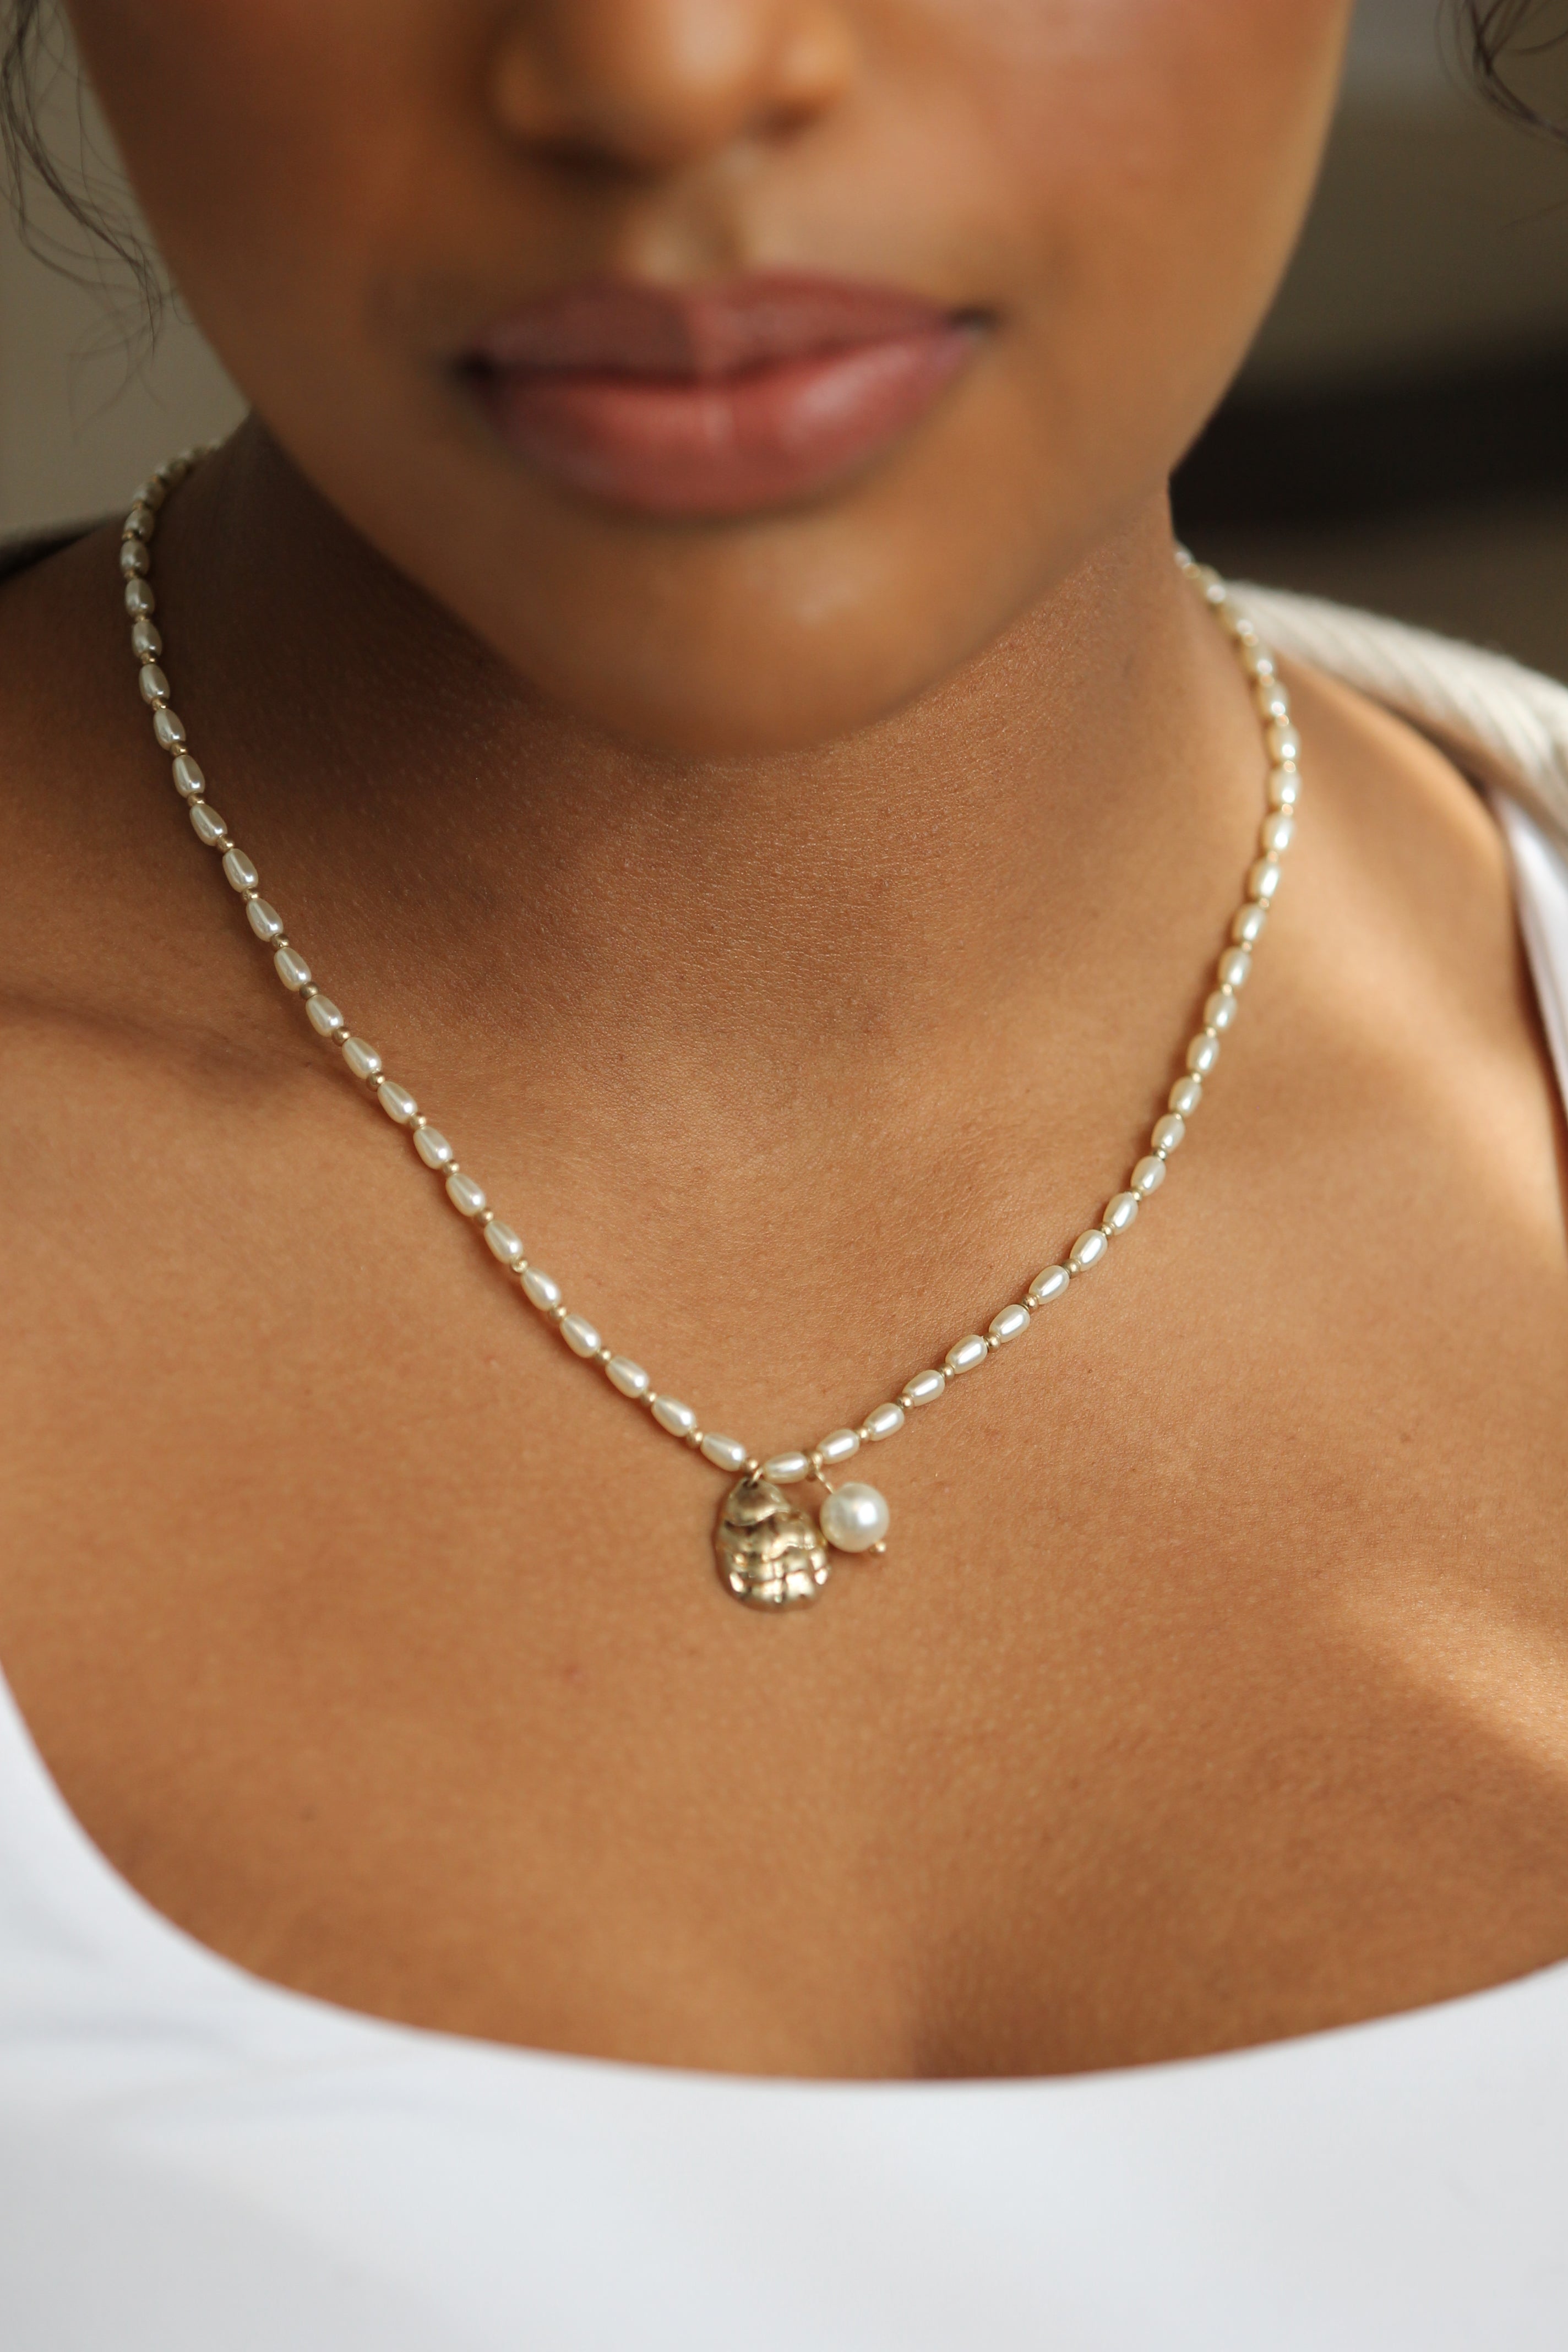 Gold Pearl Necklace